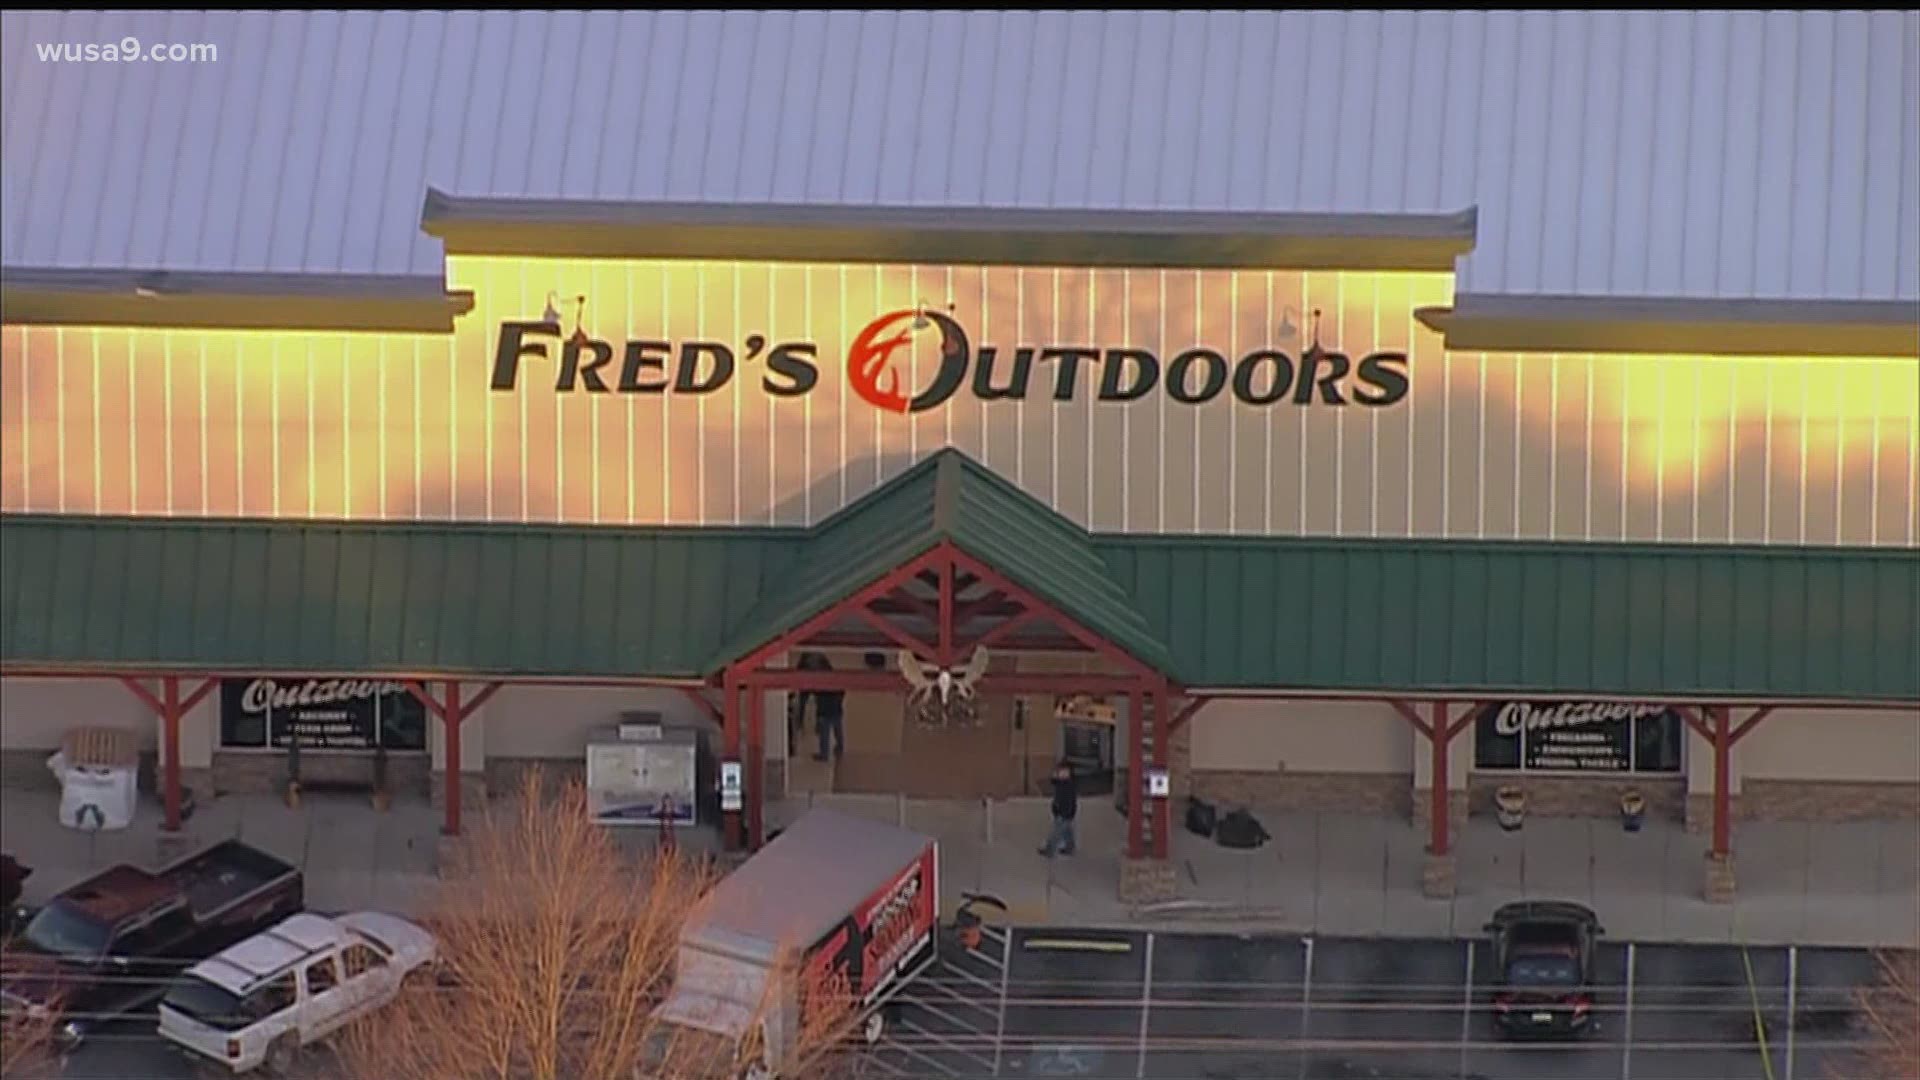 Police say the suspects were able to steal nearly 10 firearms sold at the store.